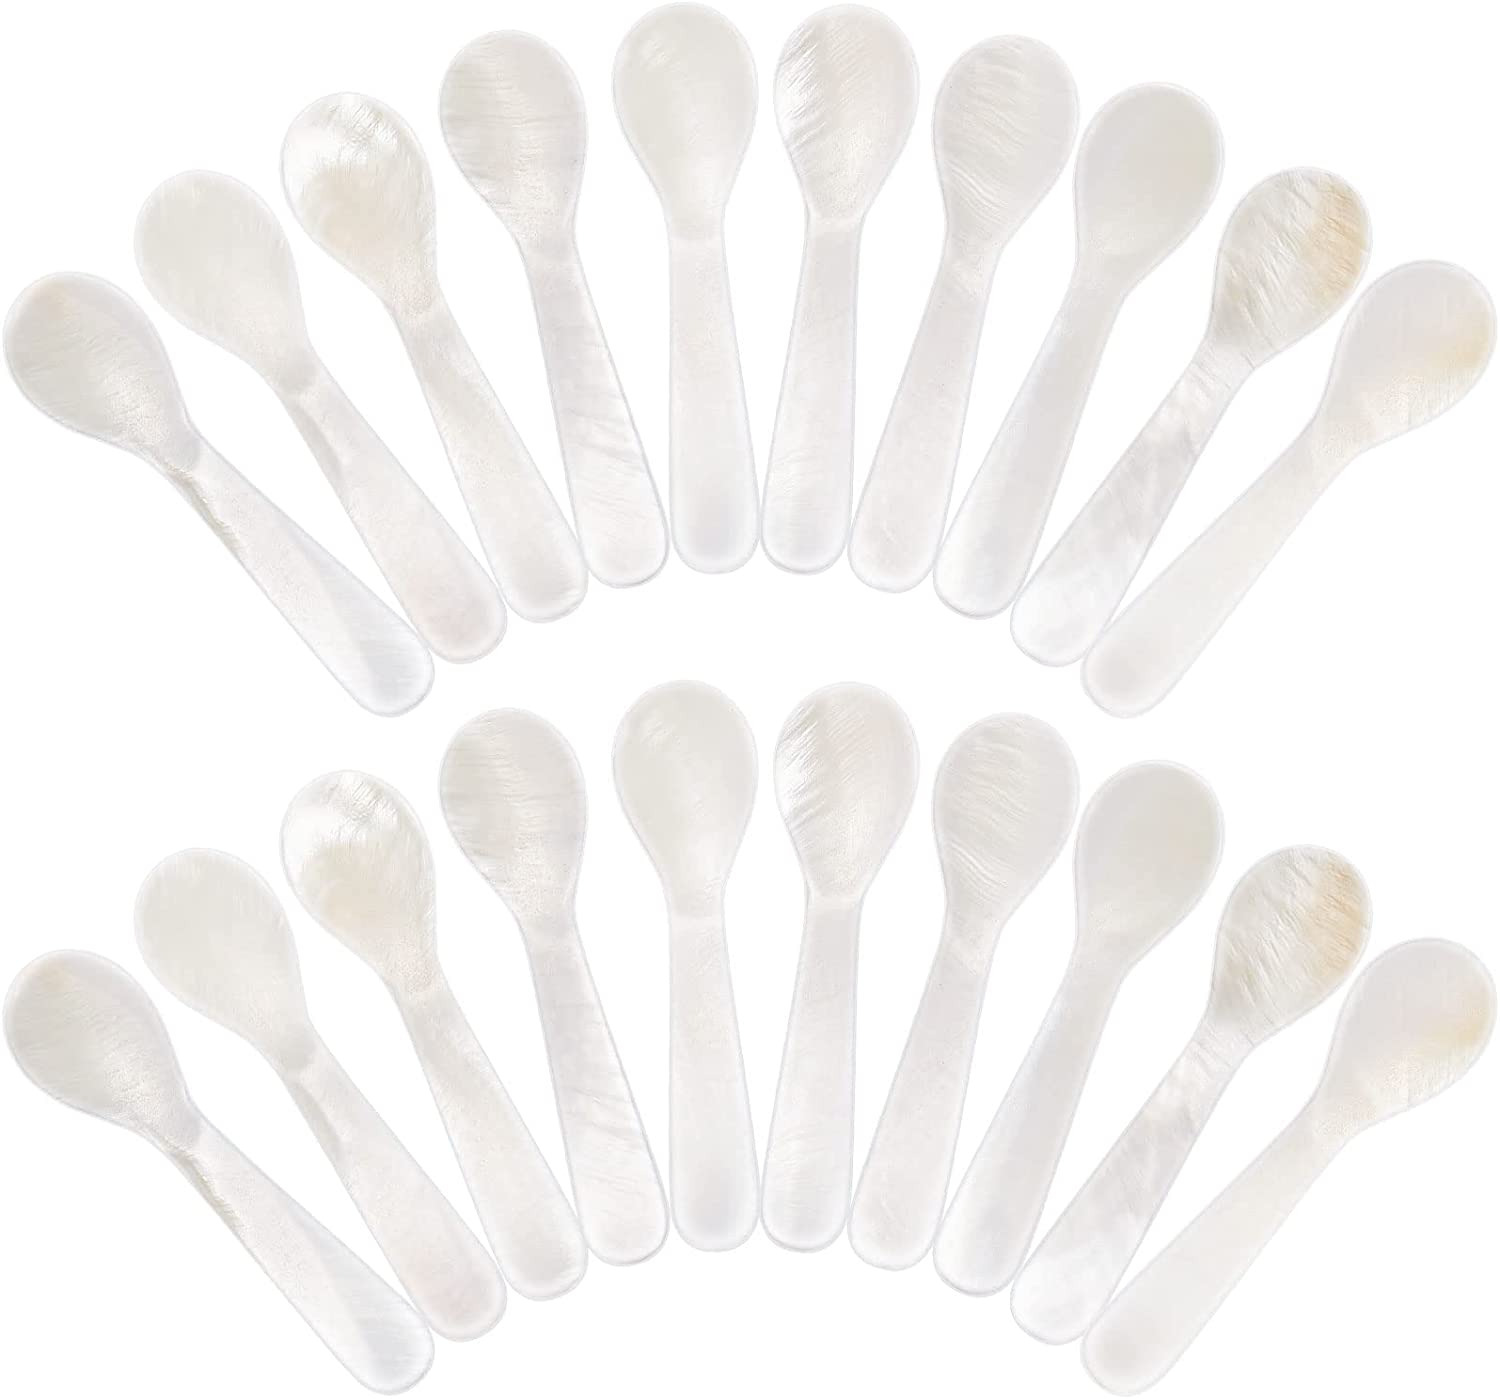 Set of Caviar Spoons Shell Spoon Mother of Pearl Caviar Spoons W round Handle fo